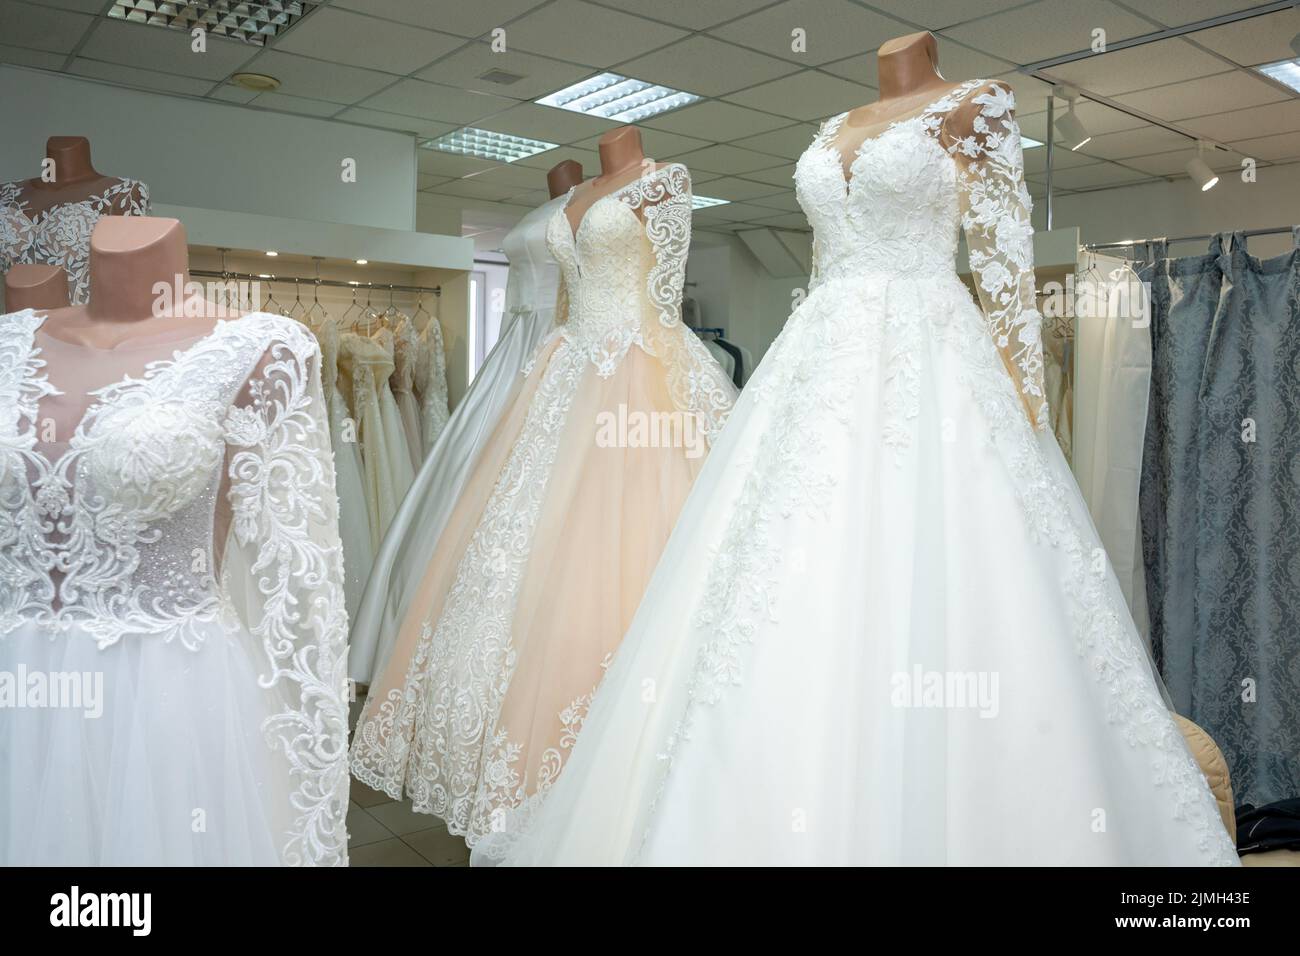 Beautiful wedding dresses in a bridal boutique on mannequins Stock Photo